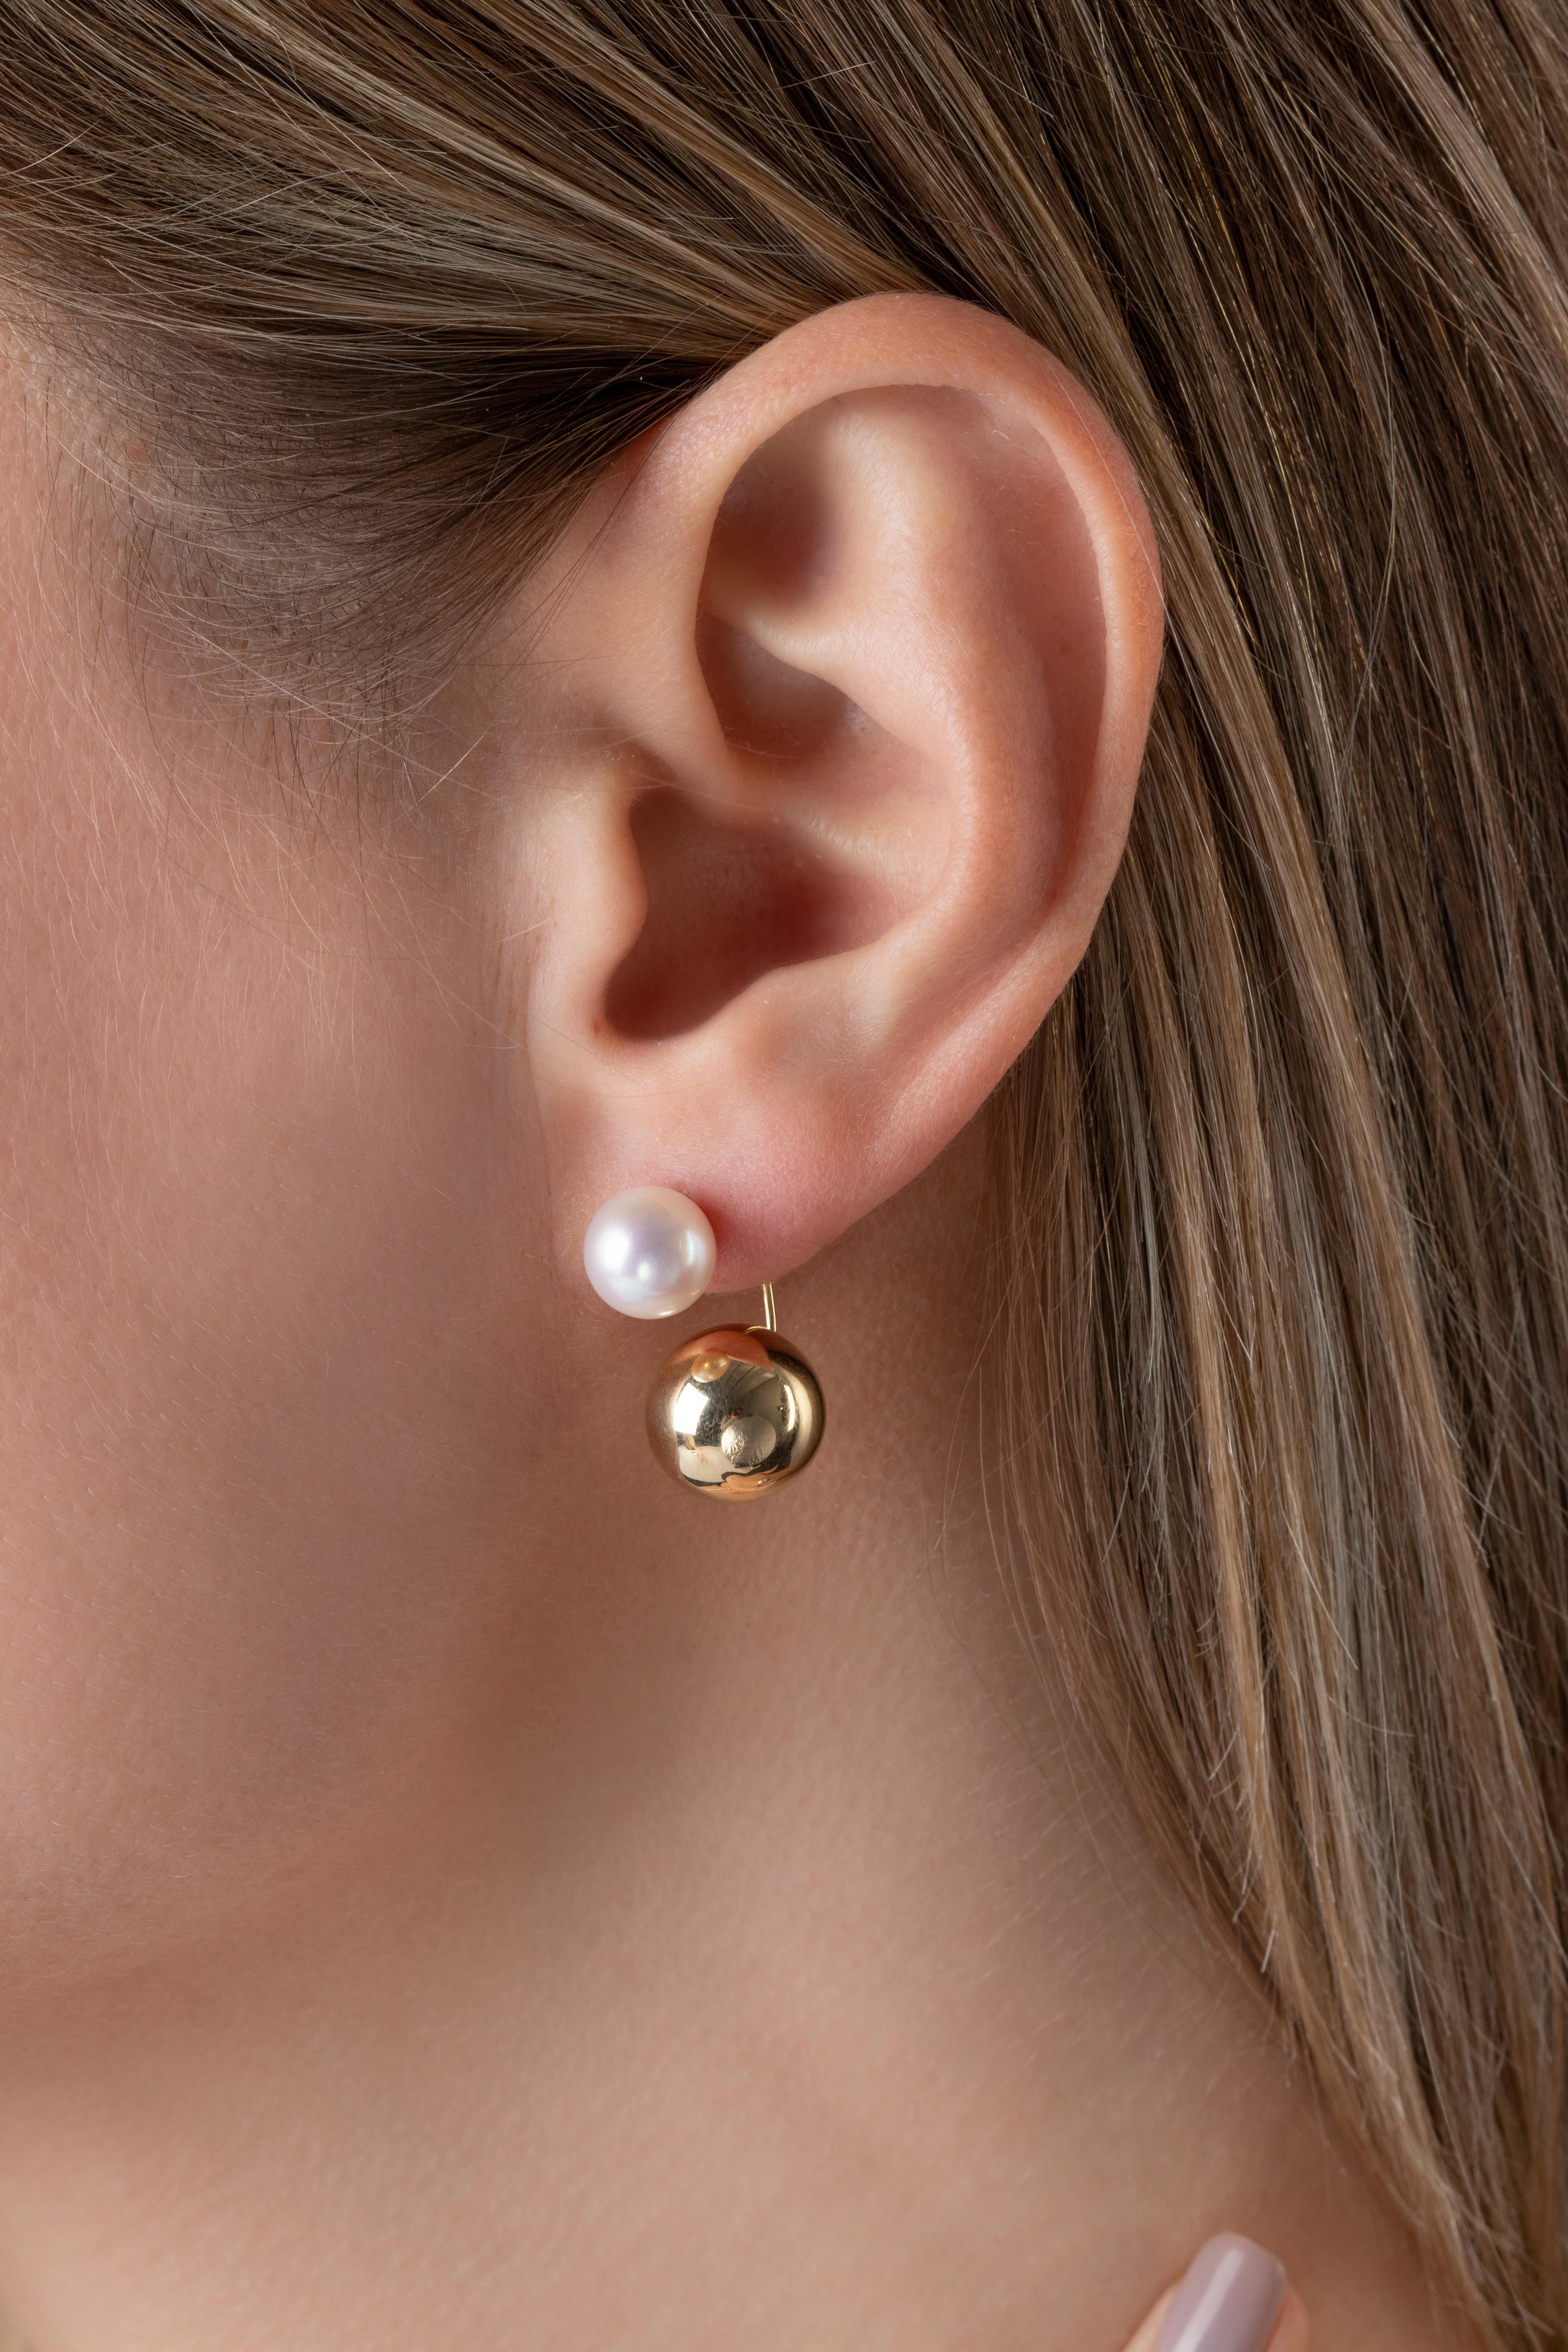 These striking earrings by Yoko London feature lustrous Akoya pearls atop a yellow gold sphere which sits beneath the lobe. Contemporary and elegant, these unique earrings will add a striking touch to any outfit.  
-8-8.5mm Japanese Akoya Pearls